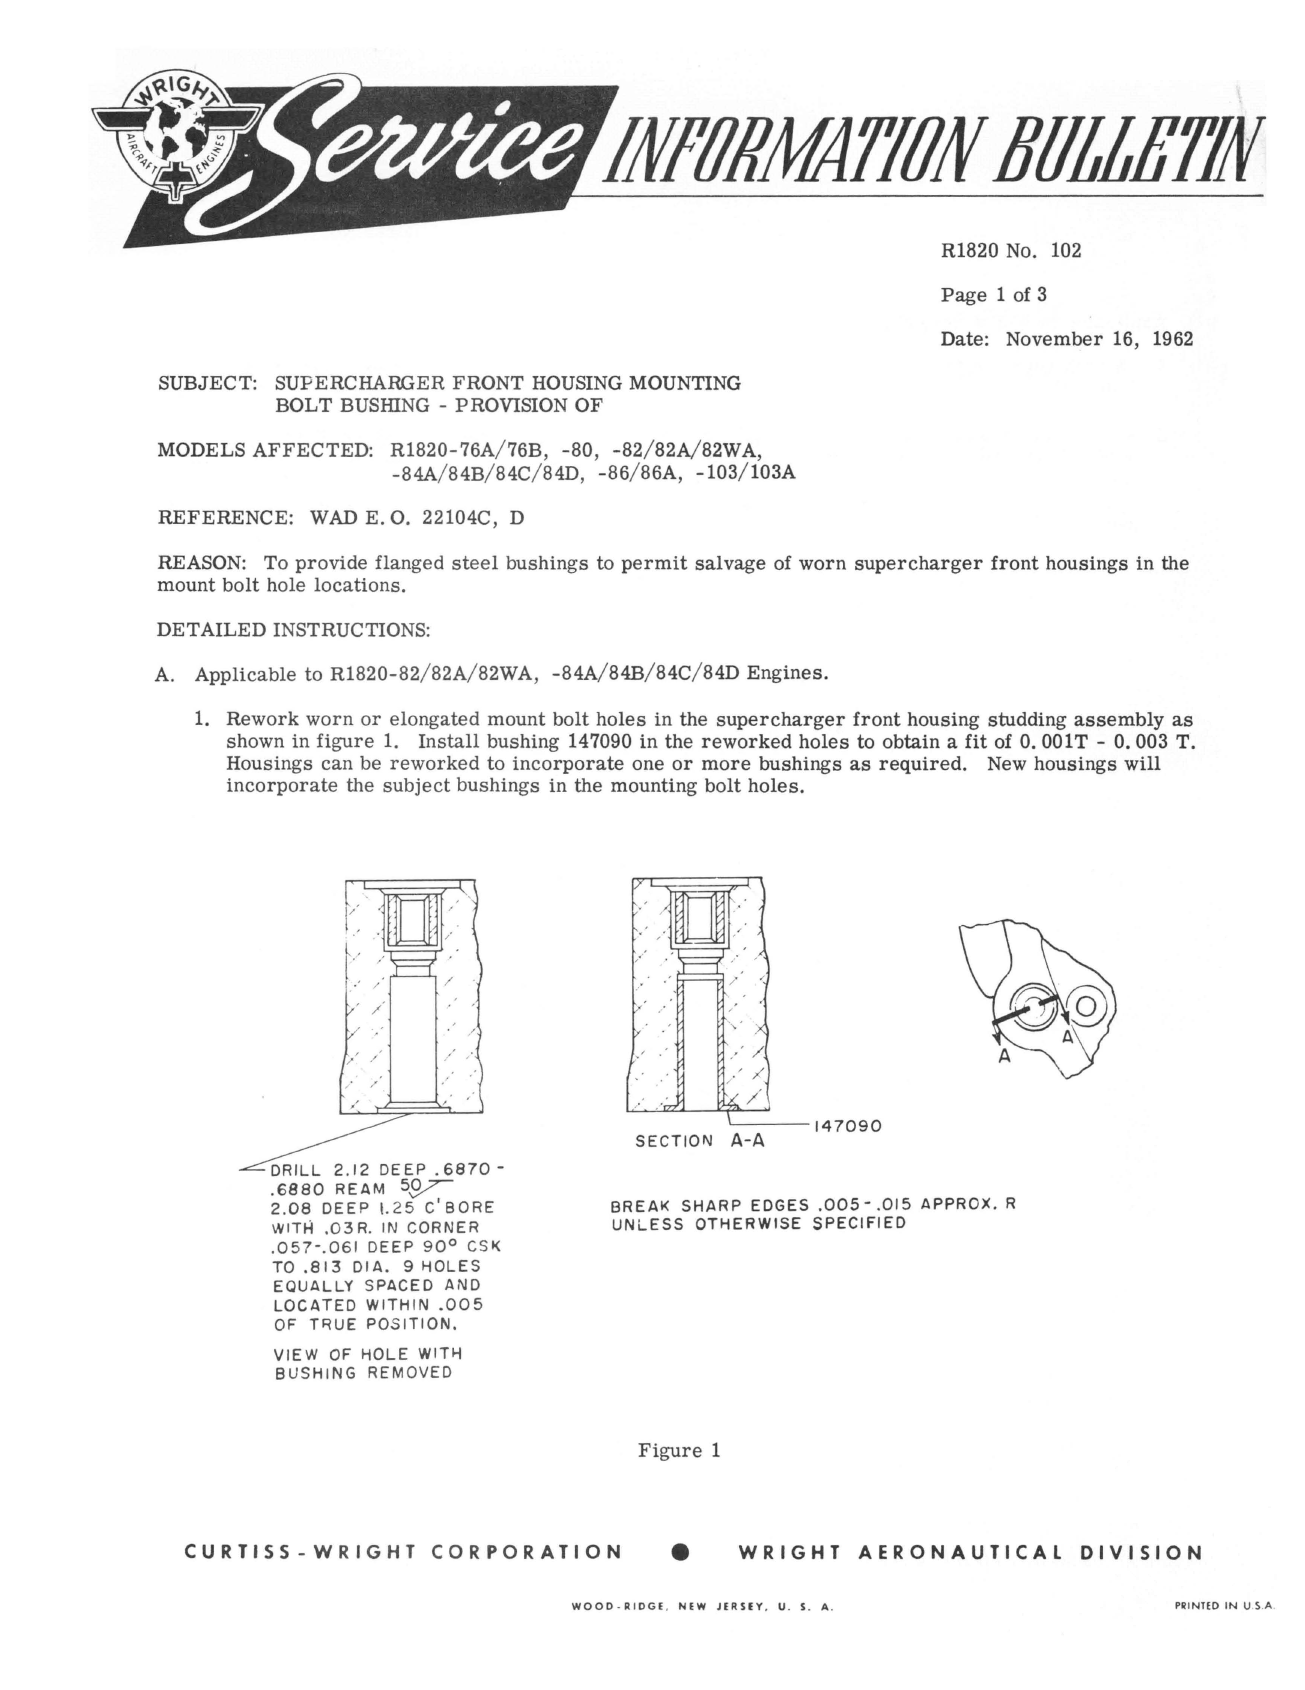 Sample page 1 from AirCorps Library document: Provision of Supercharger Front Housing Mounting Bolt Bushing